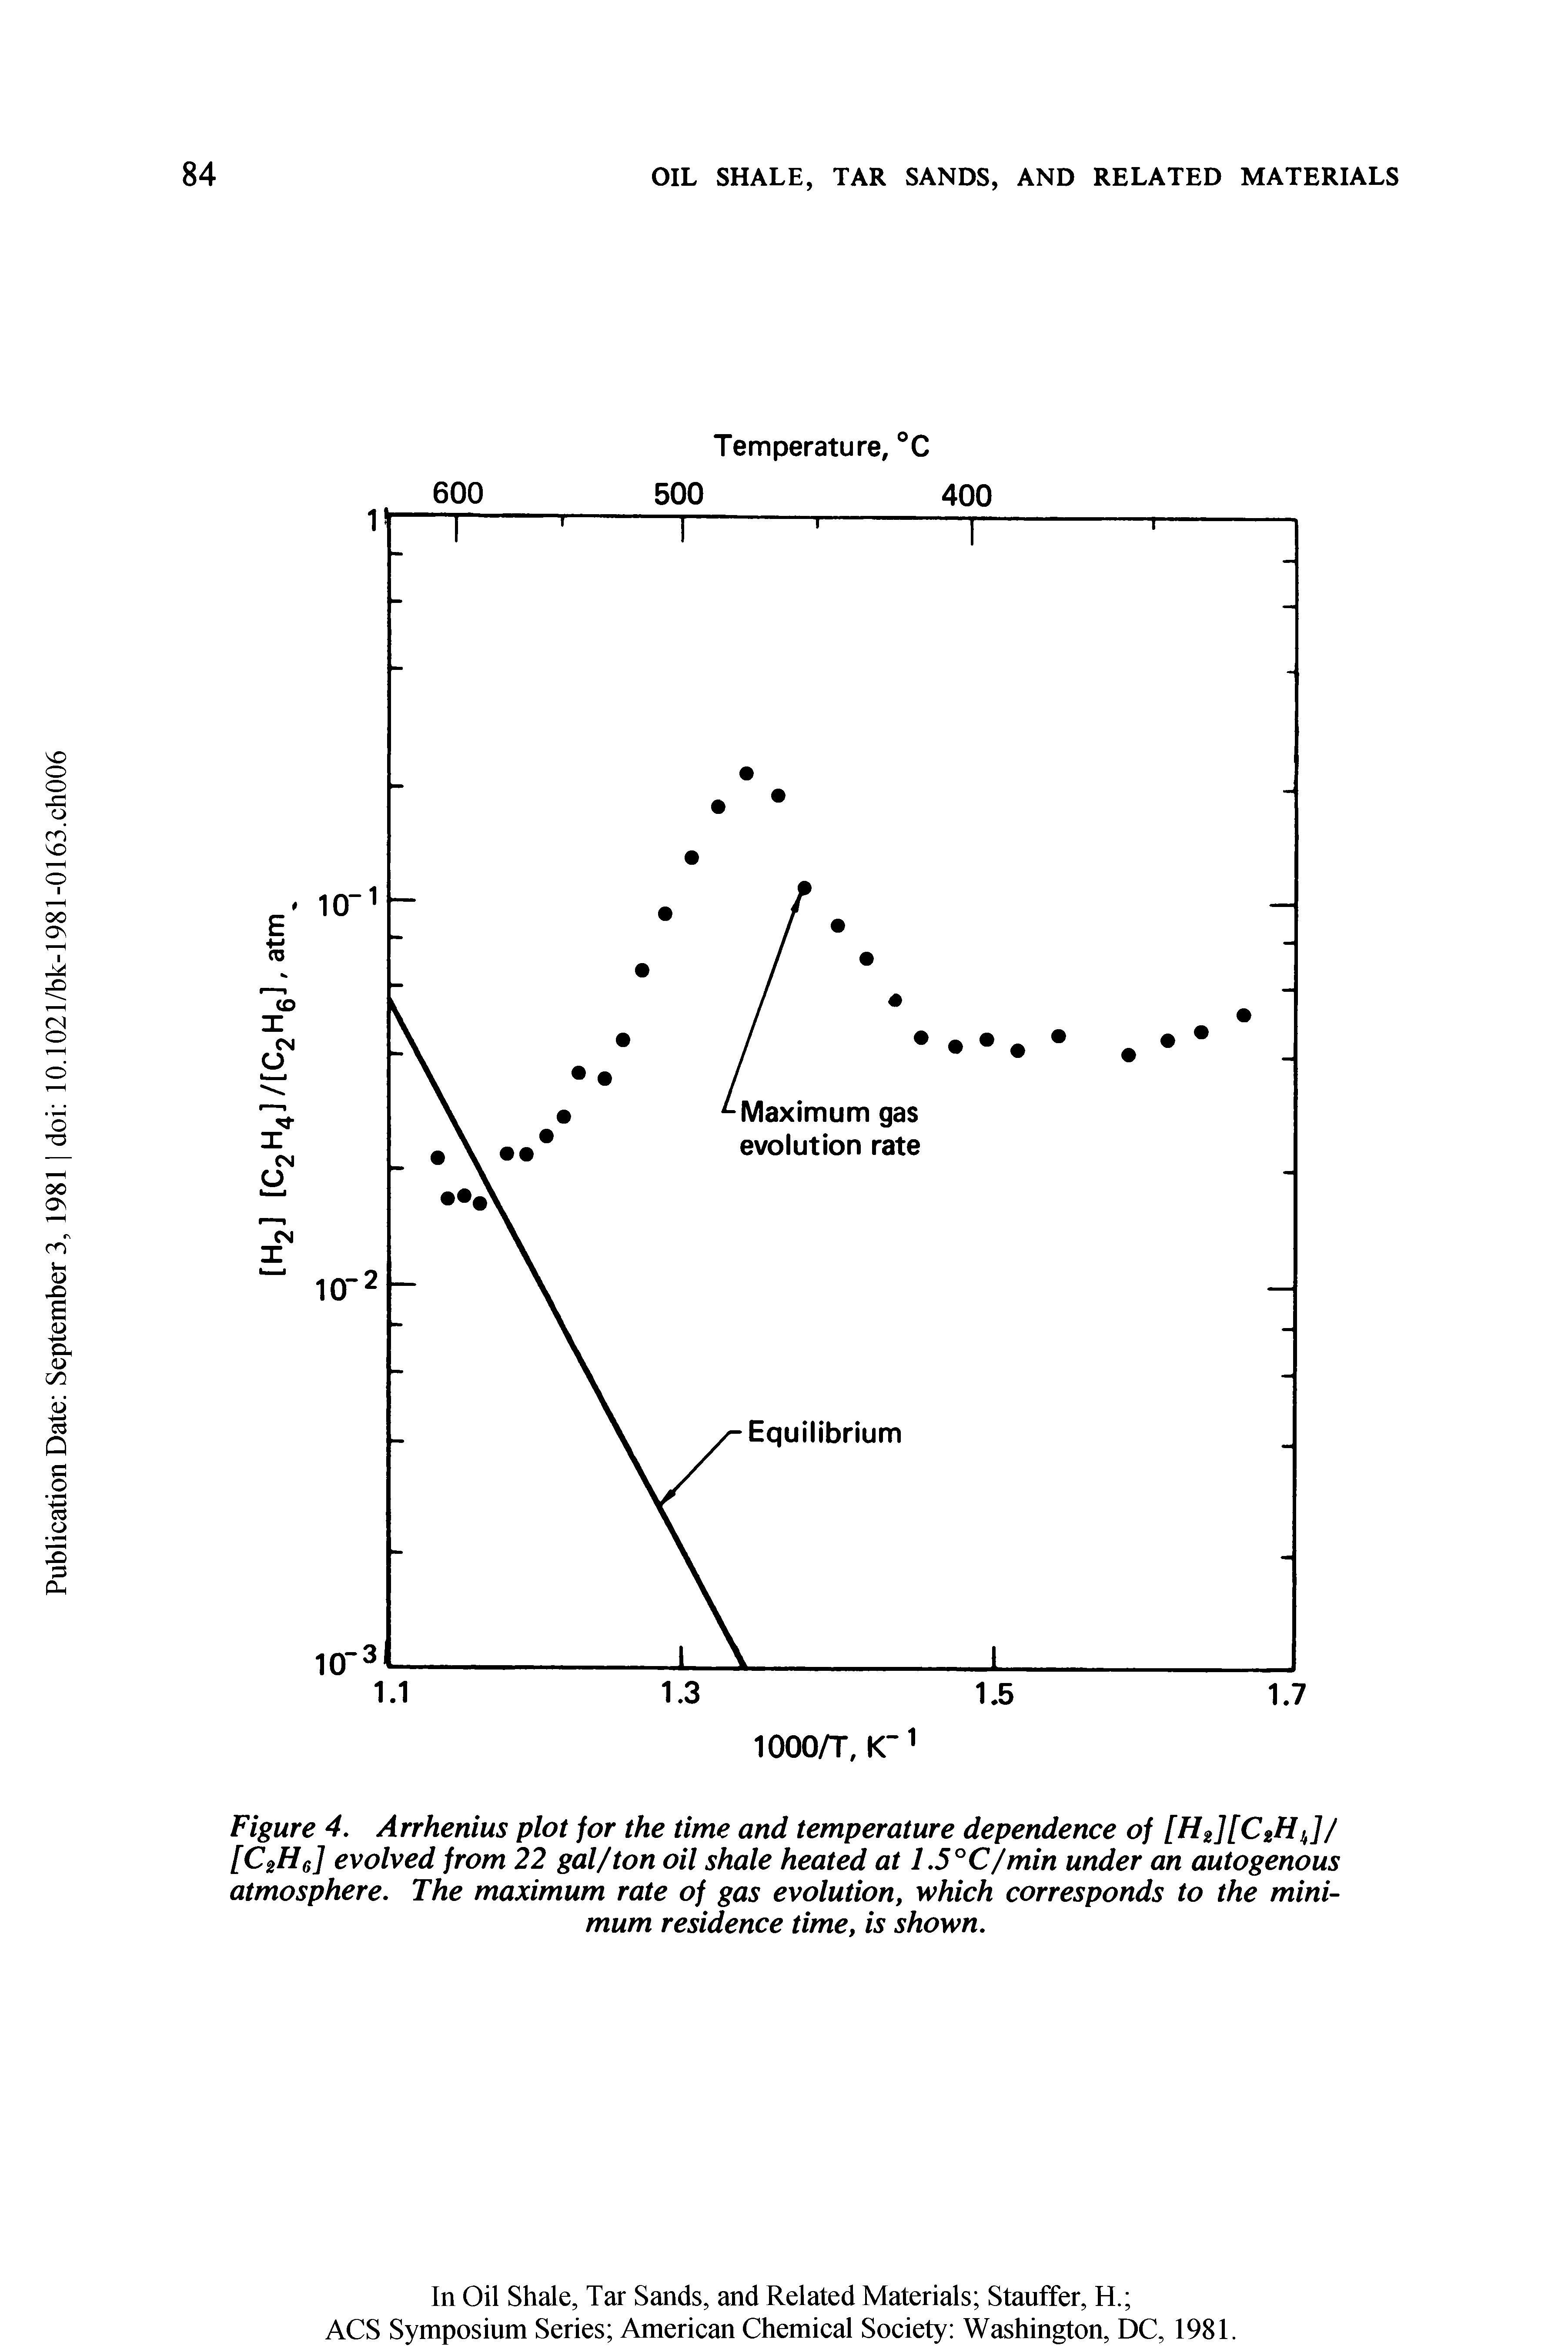 Figure 4. Arrhenius plot for the time and temperature dependence of [H2][C2H ]/ [C2H6] evolved from 22 gal/ton oil shale heated at 1.5 °C/min under an autogenous atmosphere. The maximum rate of gas evolution, which corresponds to the minimum residence time, is shown.